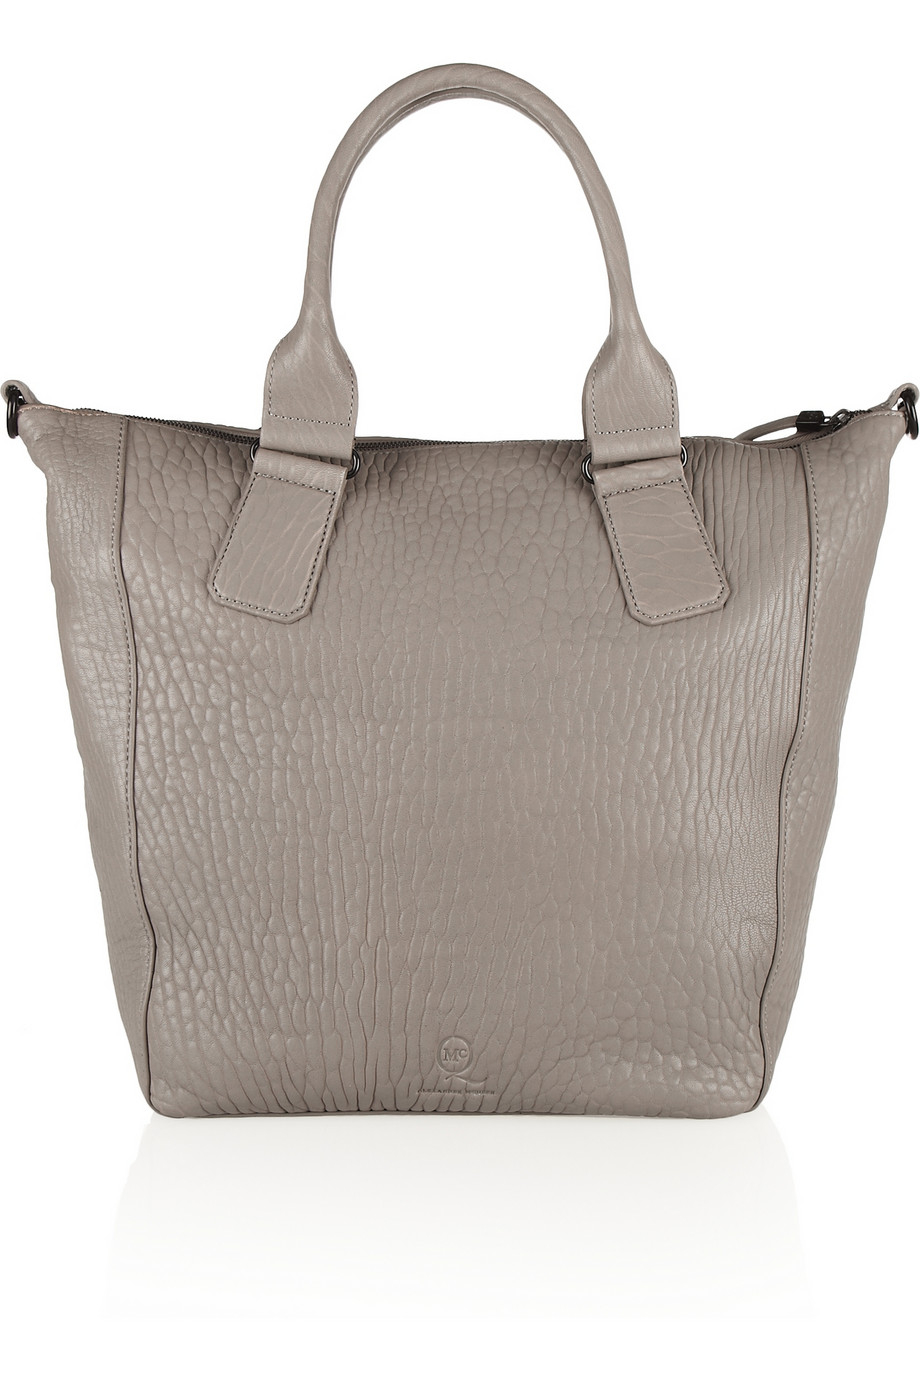 McQ Stepney Texturedleather Tote in Gray - Lyst